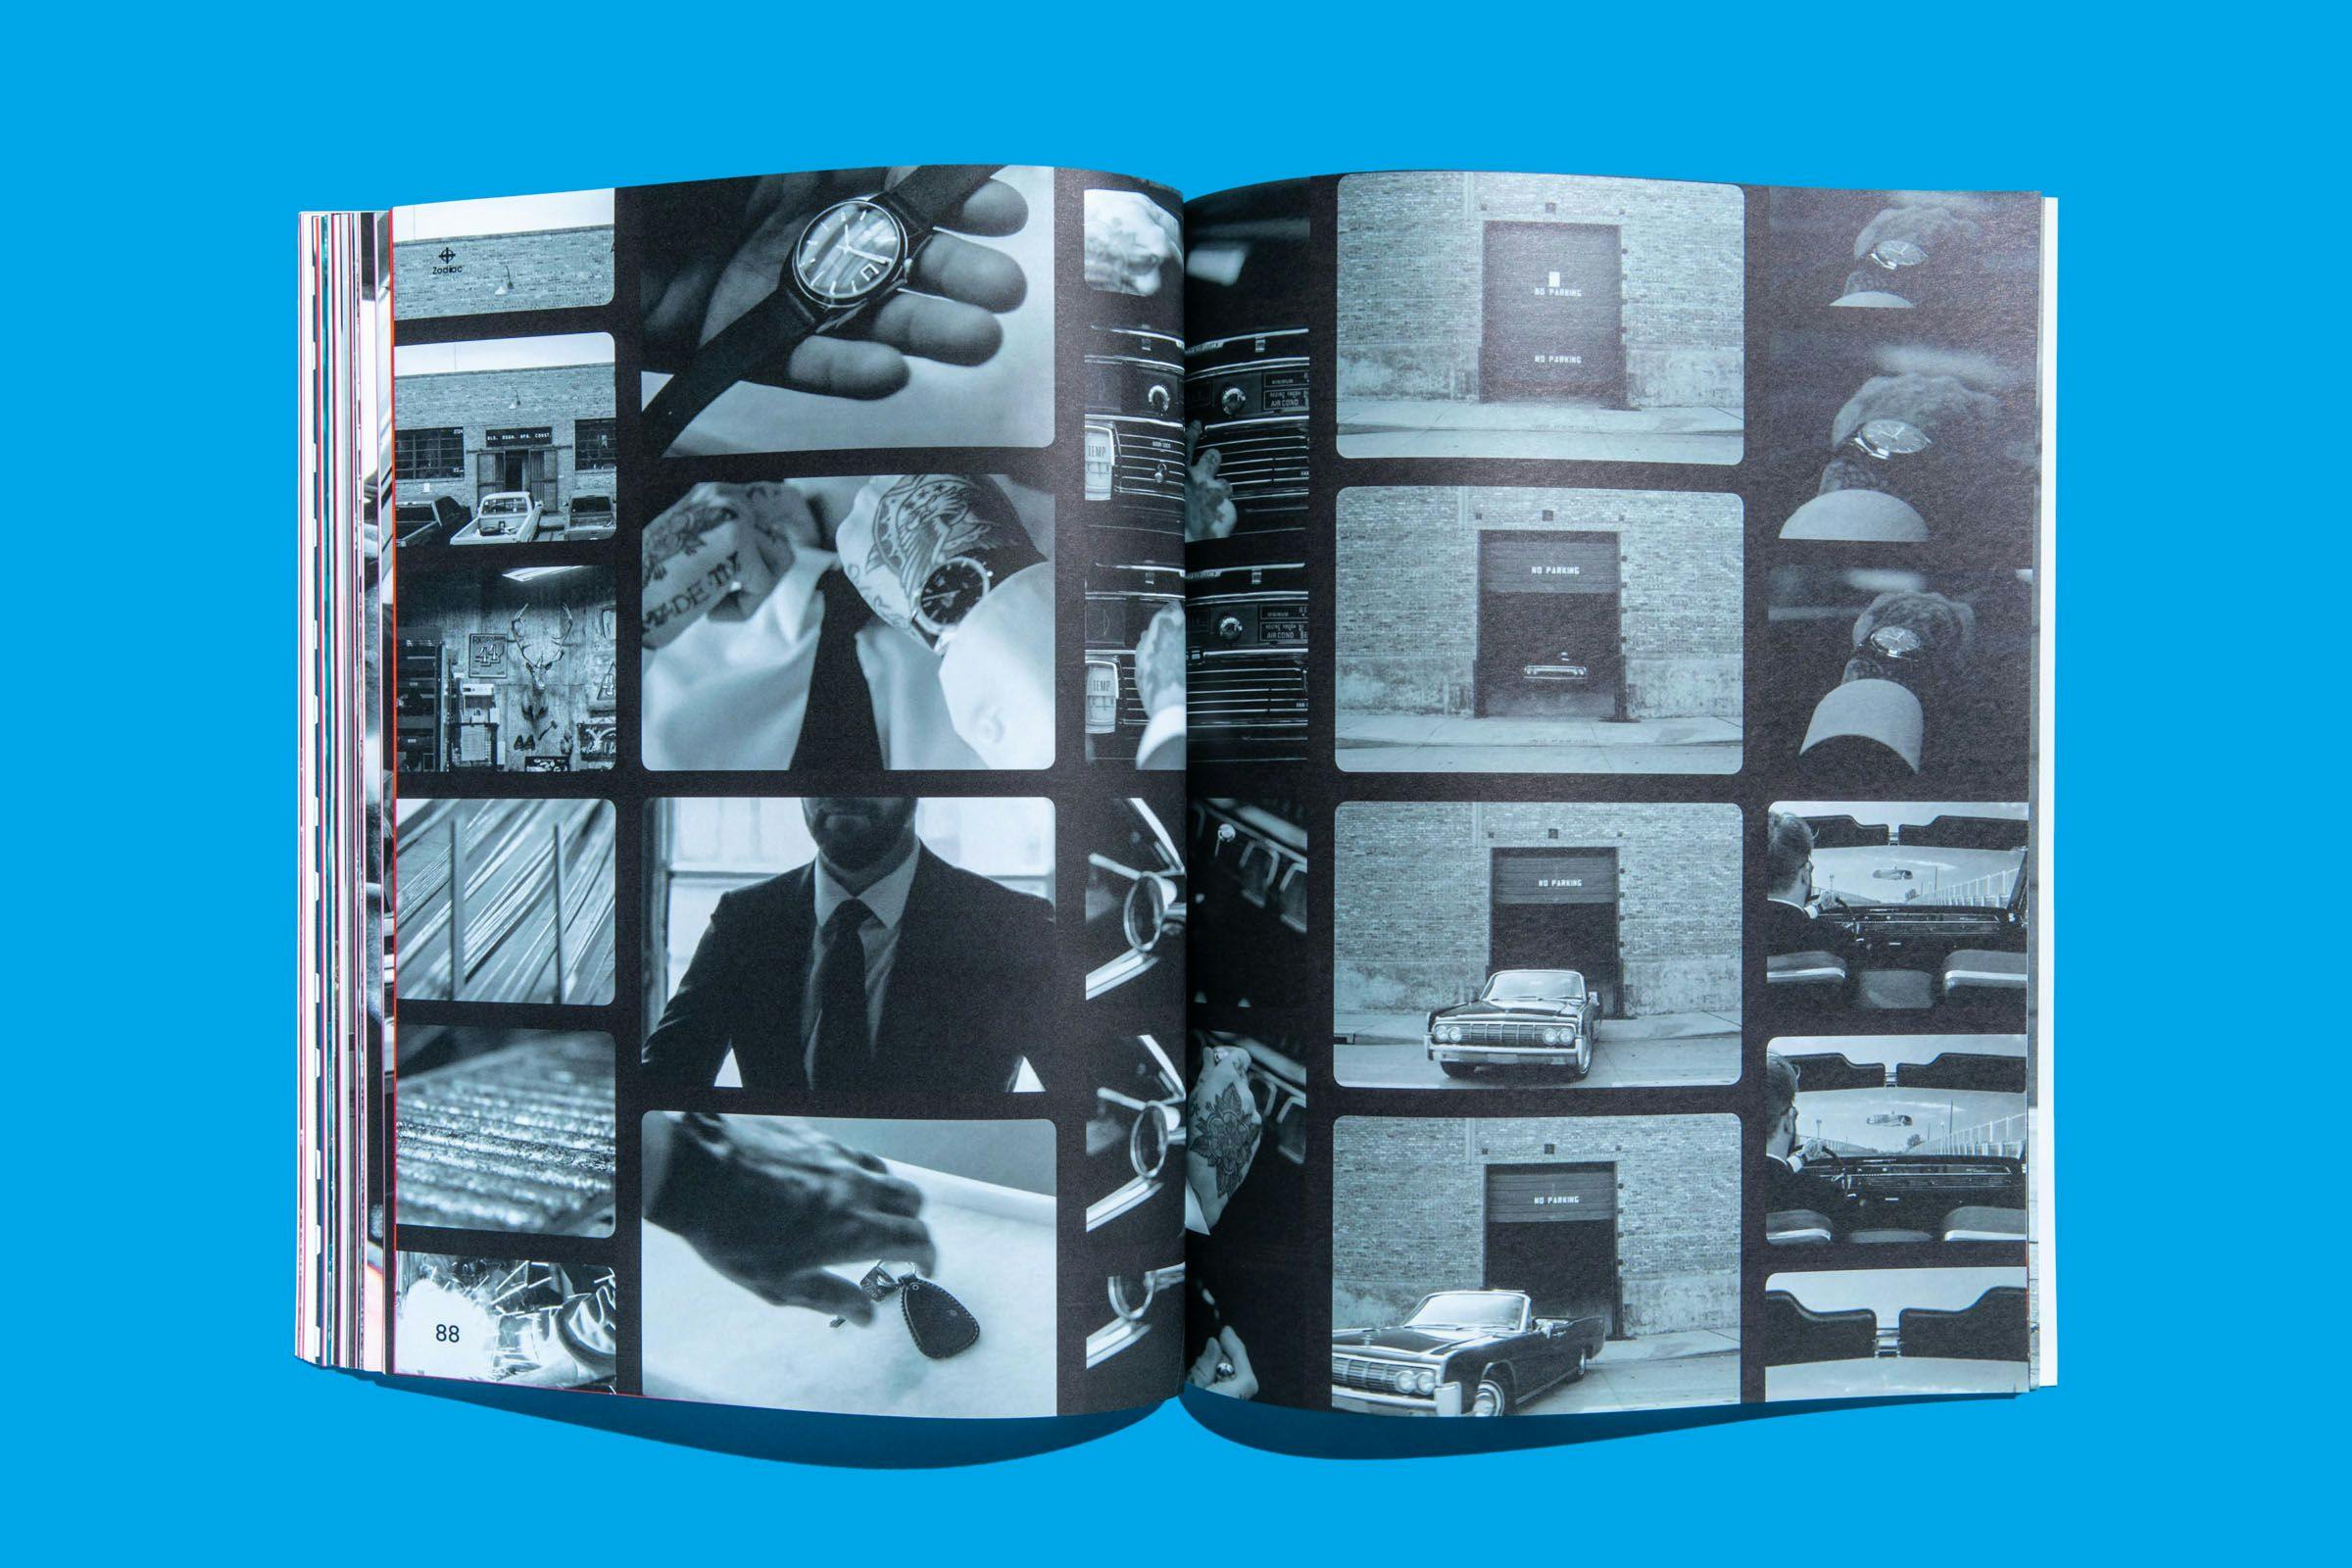 Pages from the Zodiac Watches: Brand Book with monochromatic photos